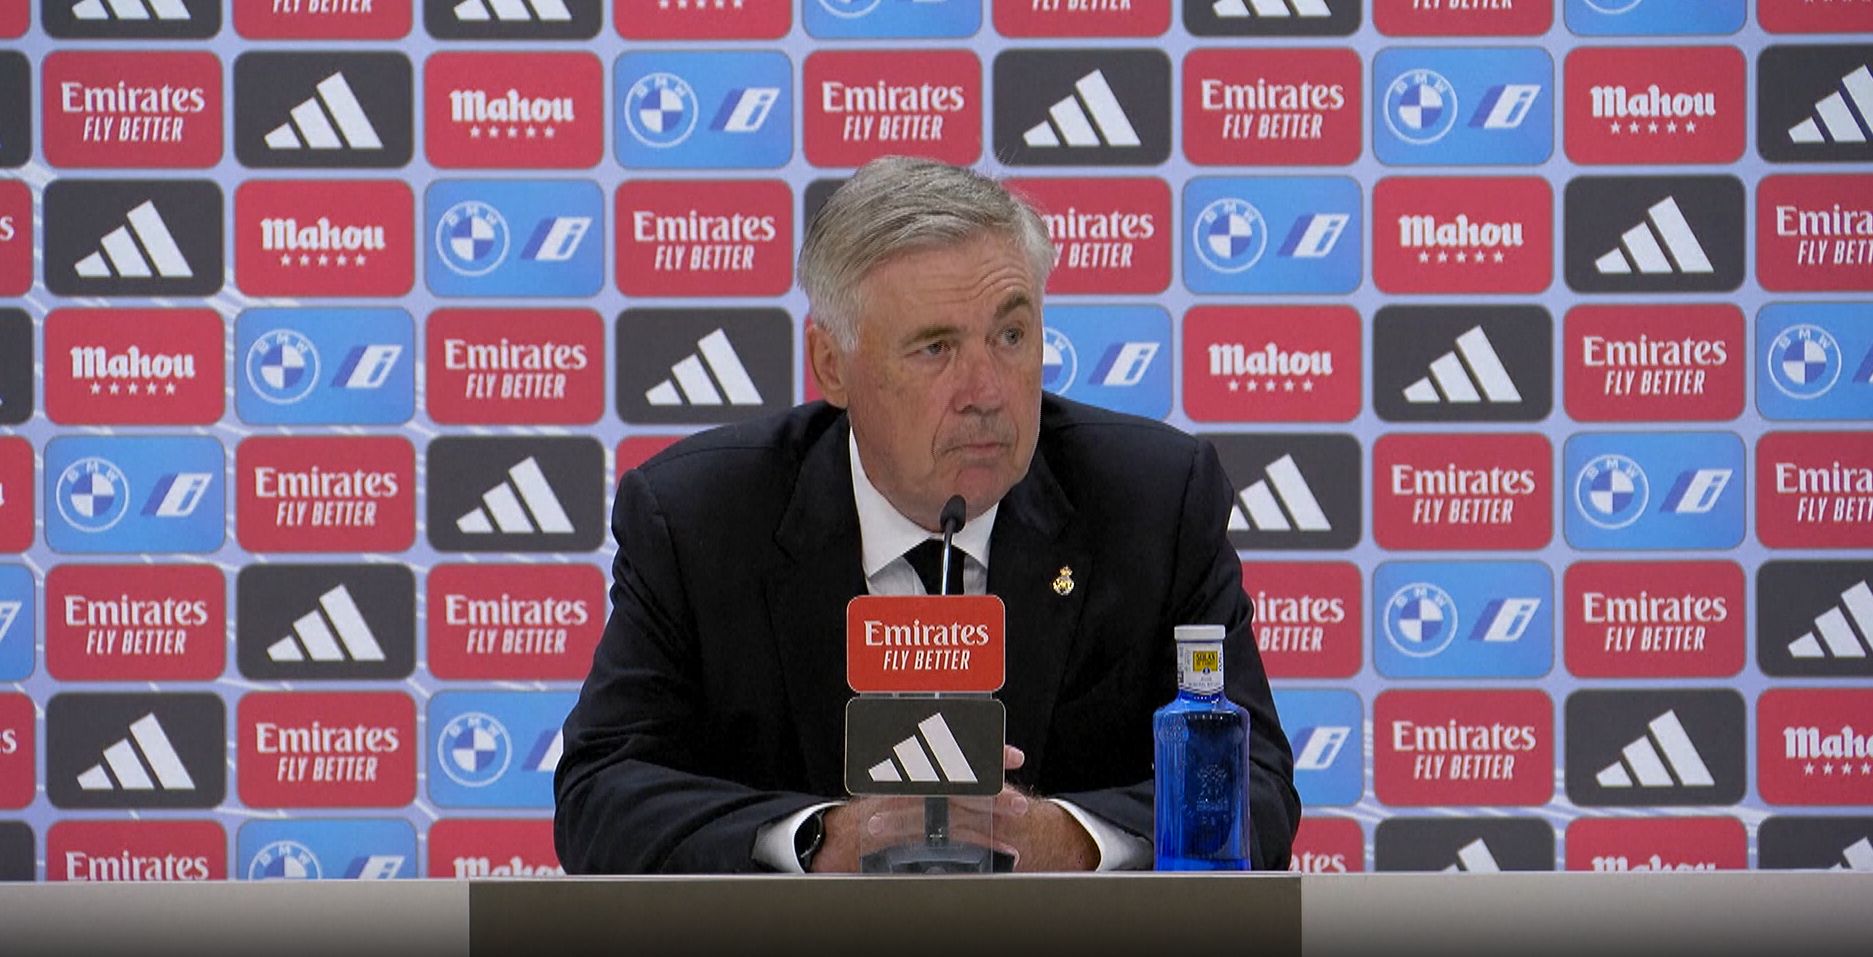 Carlo Ancelotti promises change in style for Real Madrid – ‘There will be days we use a low block’